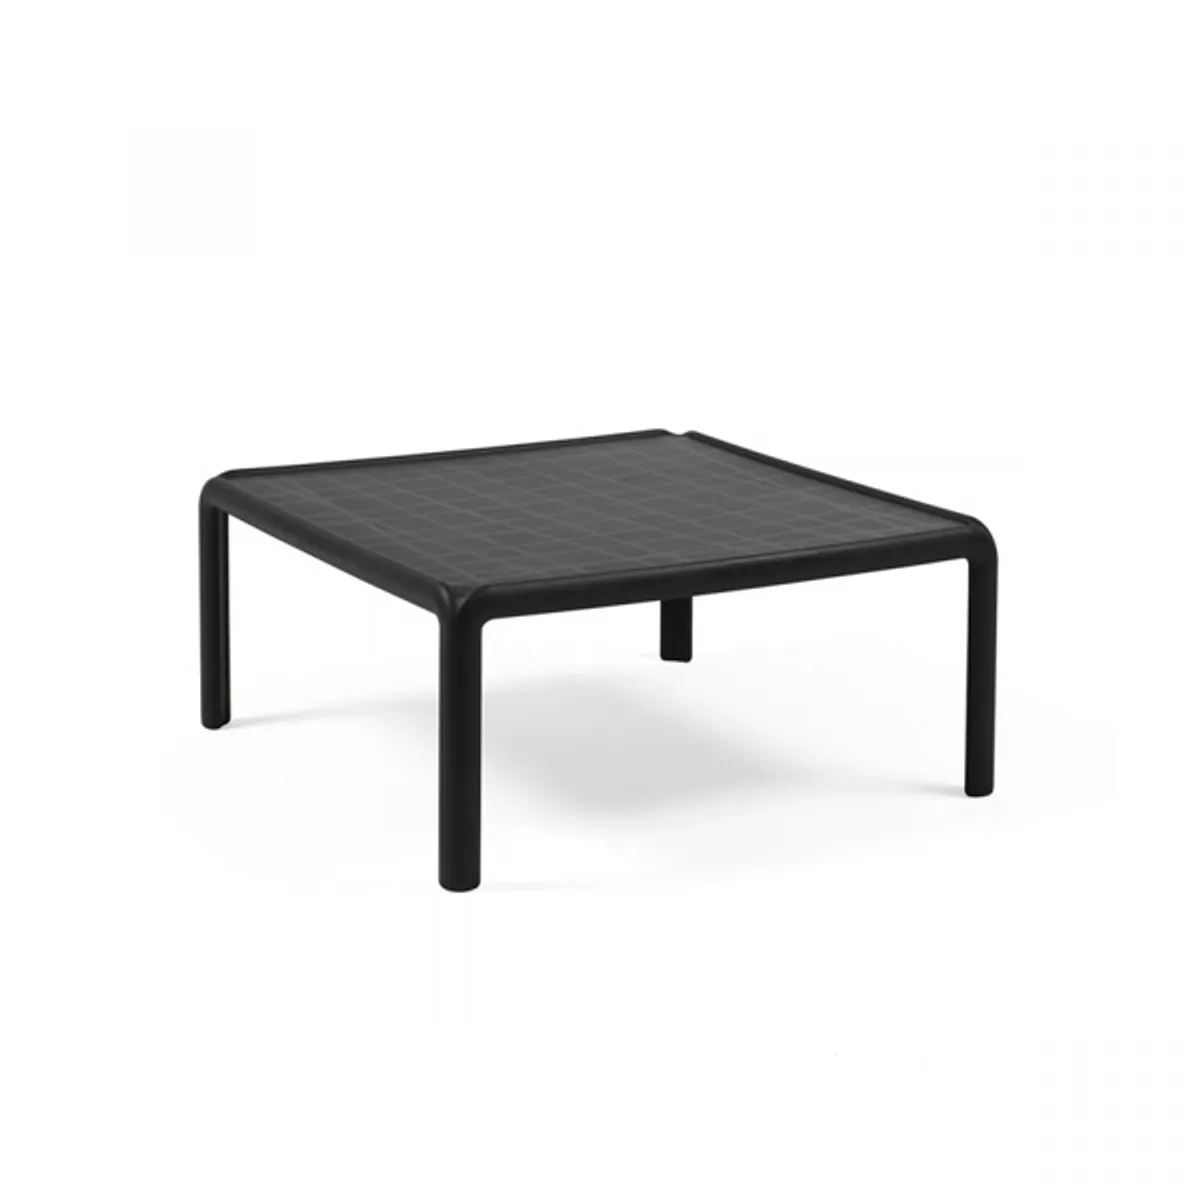 Komodo coffee table Inside Out Contracts4